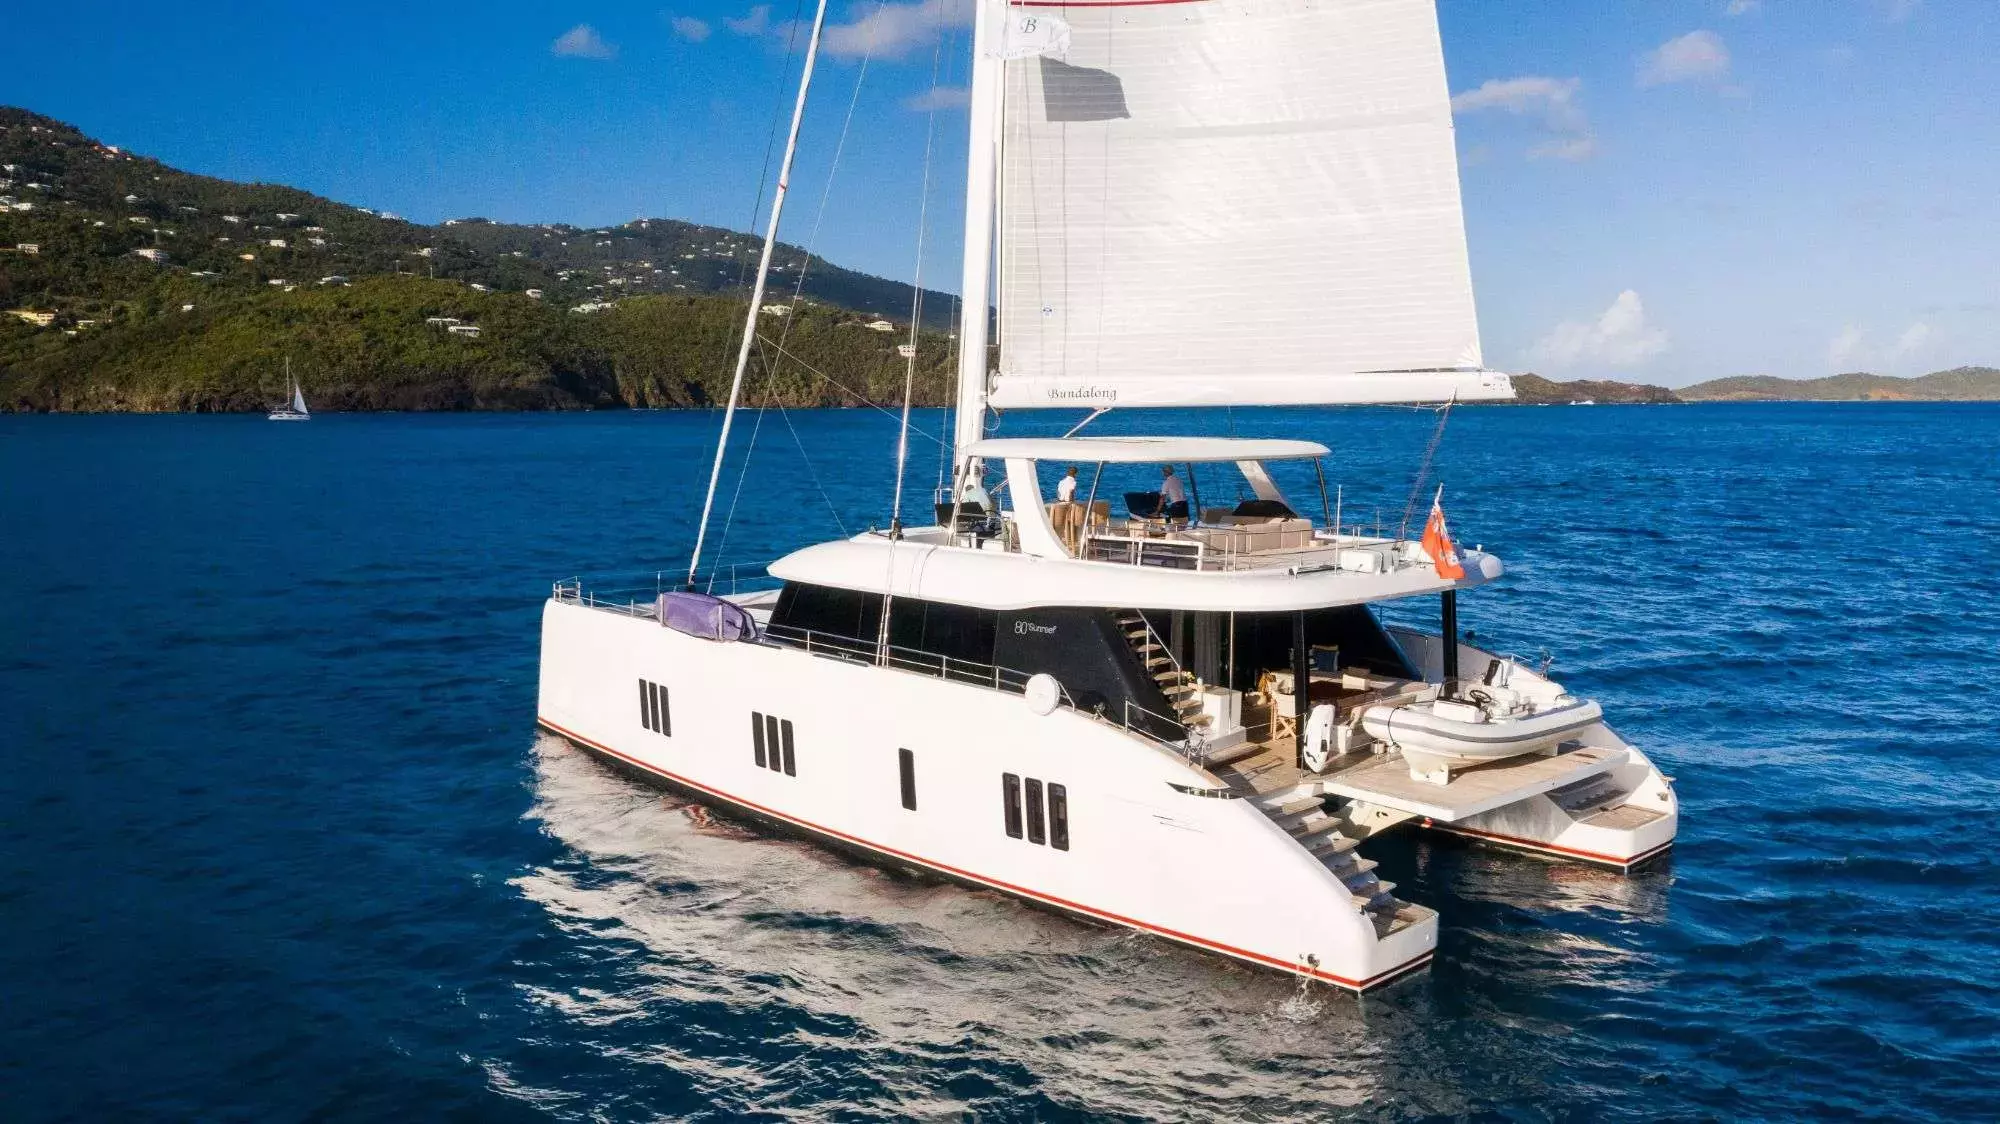 Bundalong by Sunreef Yachts - Top rates for a Charter of a private Luxury Catamaran in British Virgin Islands